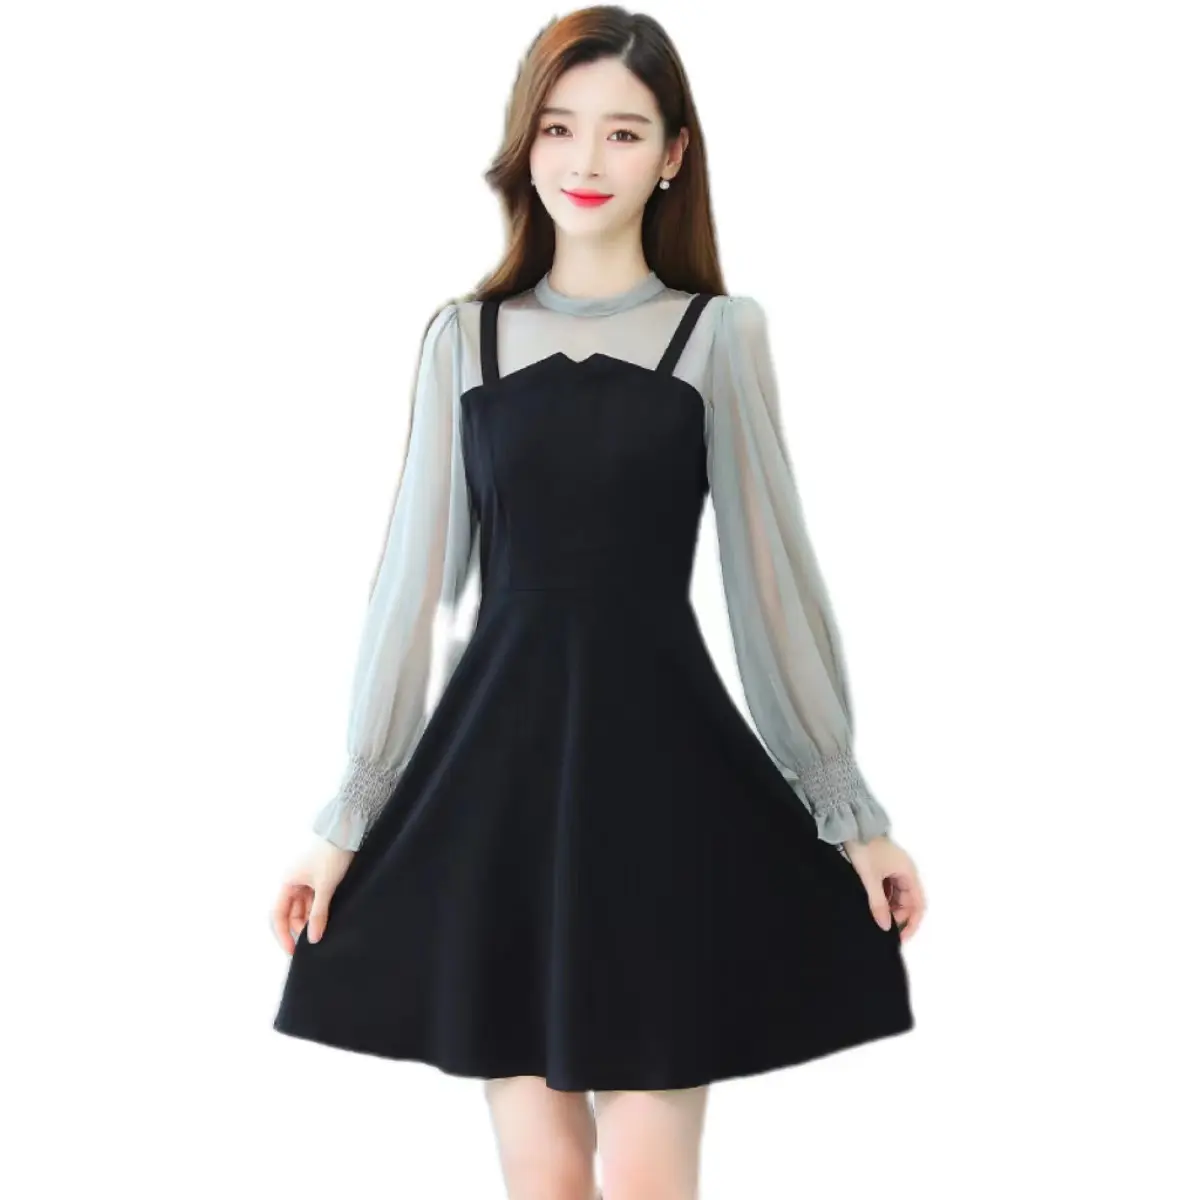 New Women Casual Dress Long Sleeve Sweetheart Clothes Knee Length Evening Dresses